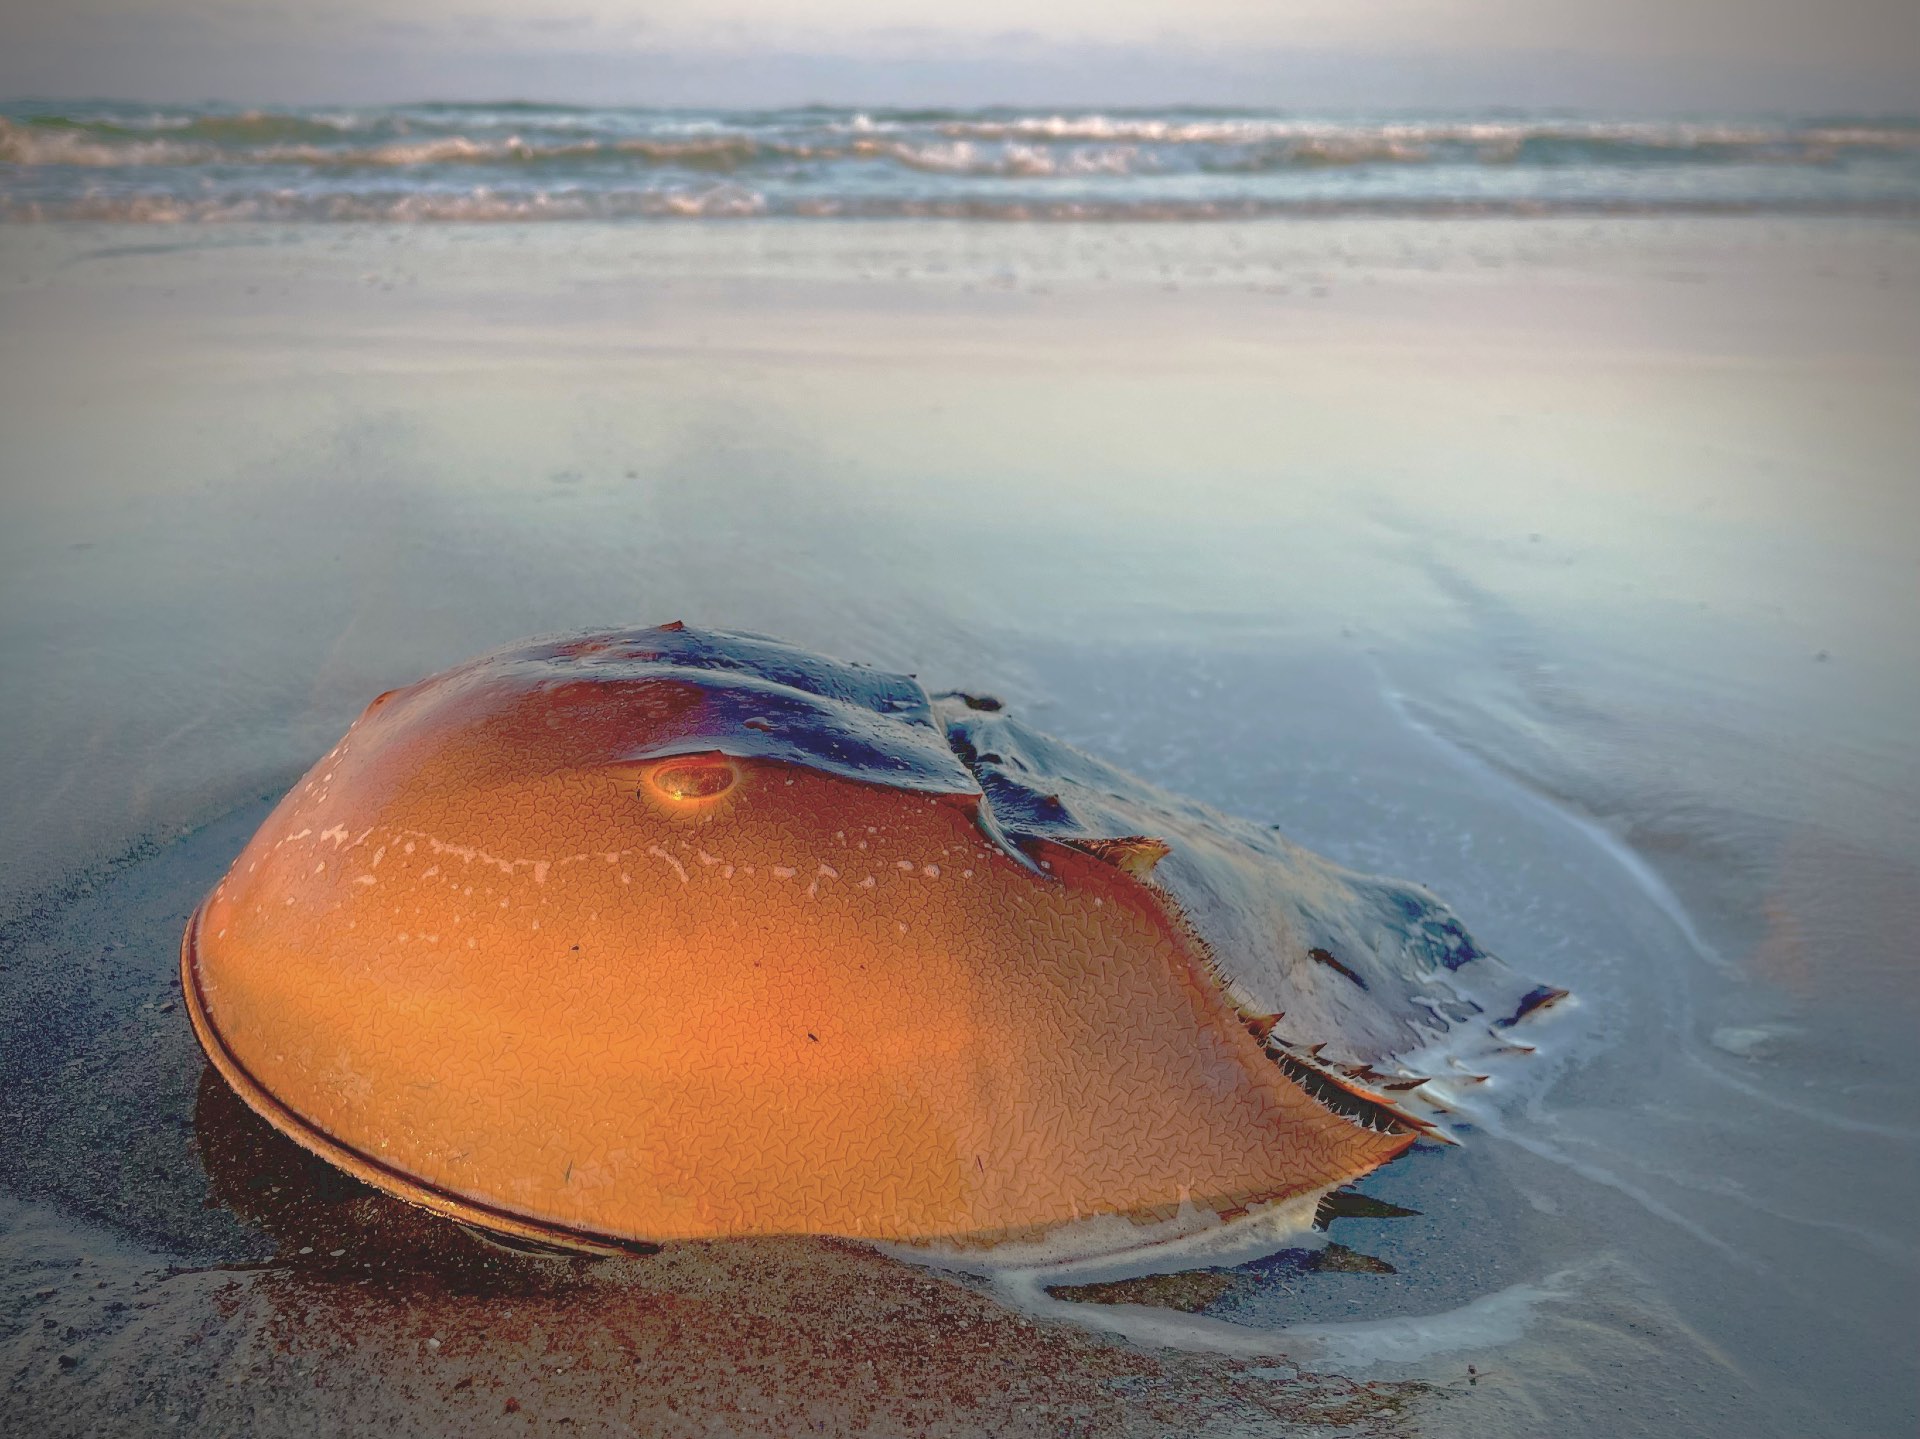 Horseshoe crab in the sand